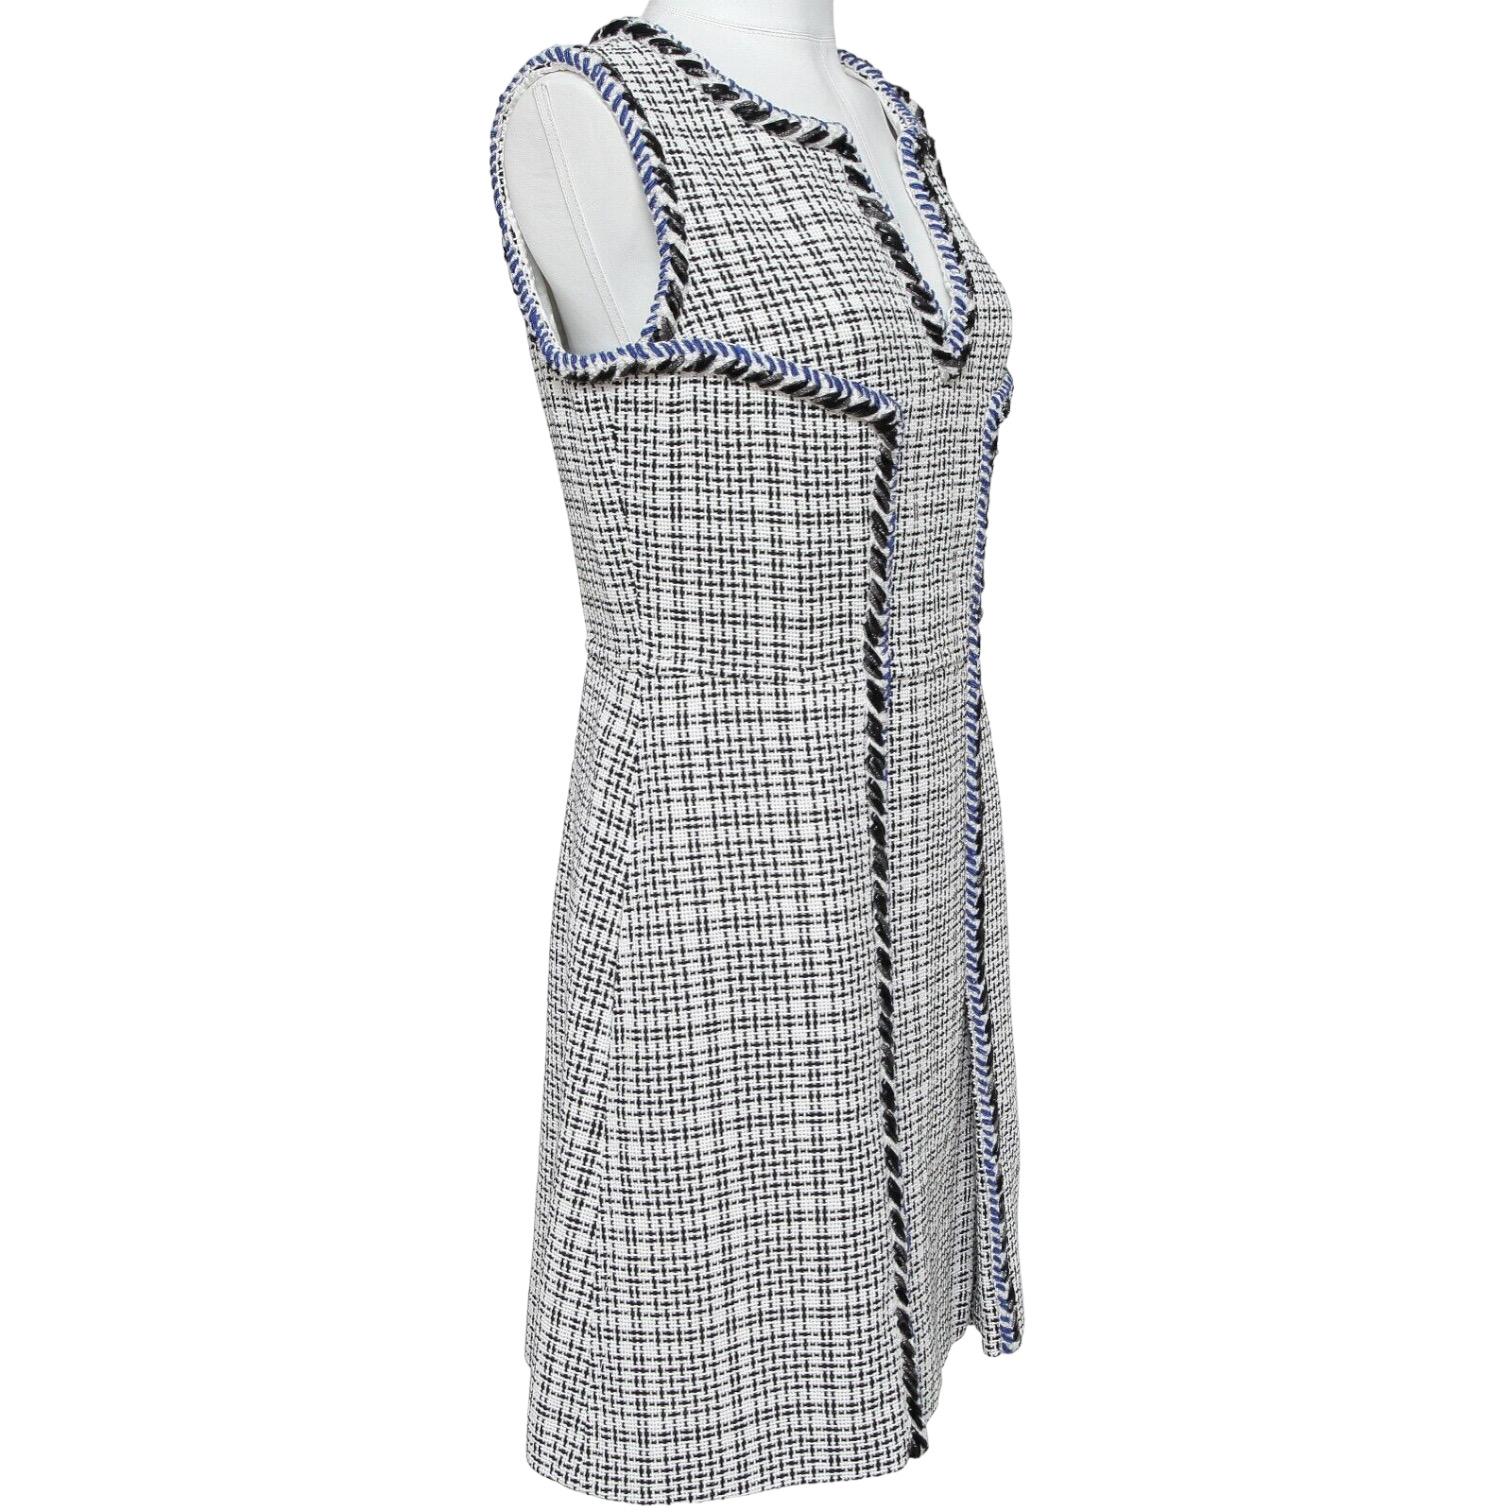 GUARANTEED AUTHENTIC PRE-SPRING 2017 CHANEL SLEEVELESS TWEED DRESS

Retail excluding sales taxes, $6,850


Design:
- Classic tweed sleeveless shift dress in black, blue and white colors.
- Metallic chevron pattern trim throughout.
- Crew neck with